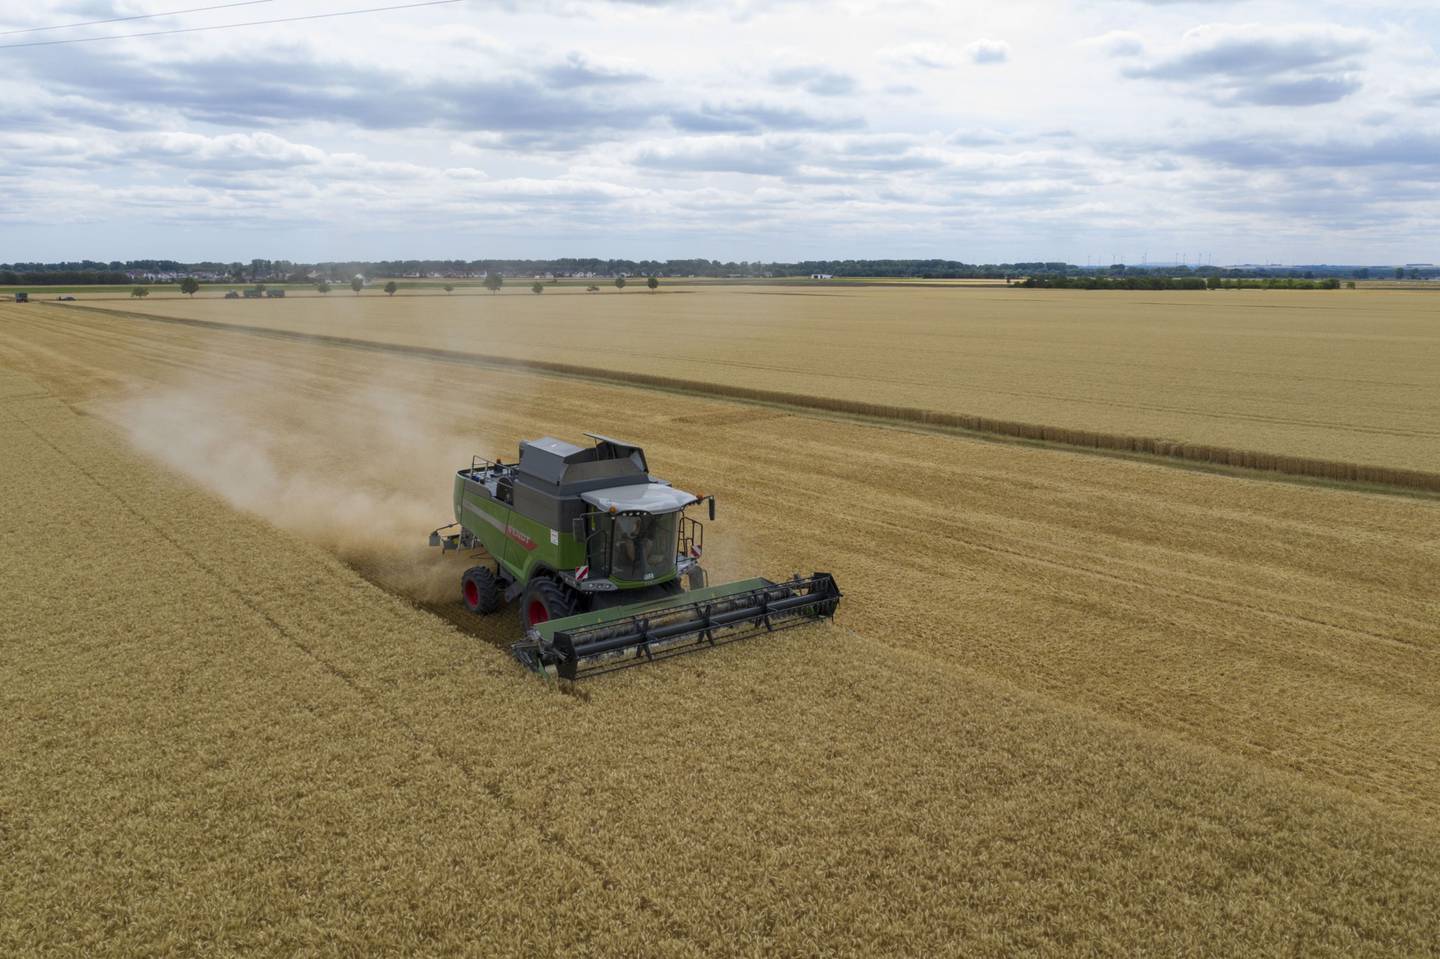 A combine harvester in a field of wheat.dfd